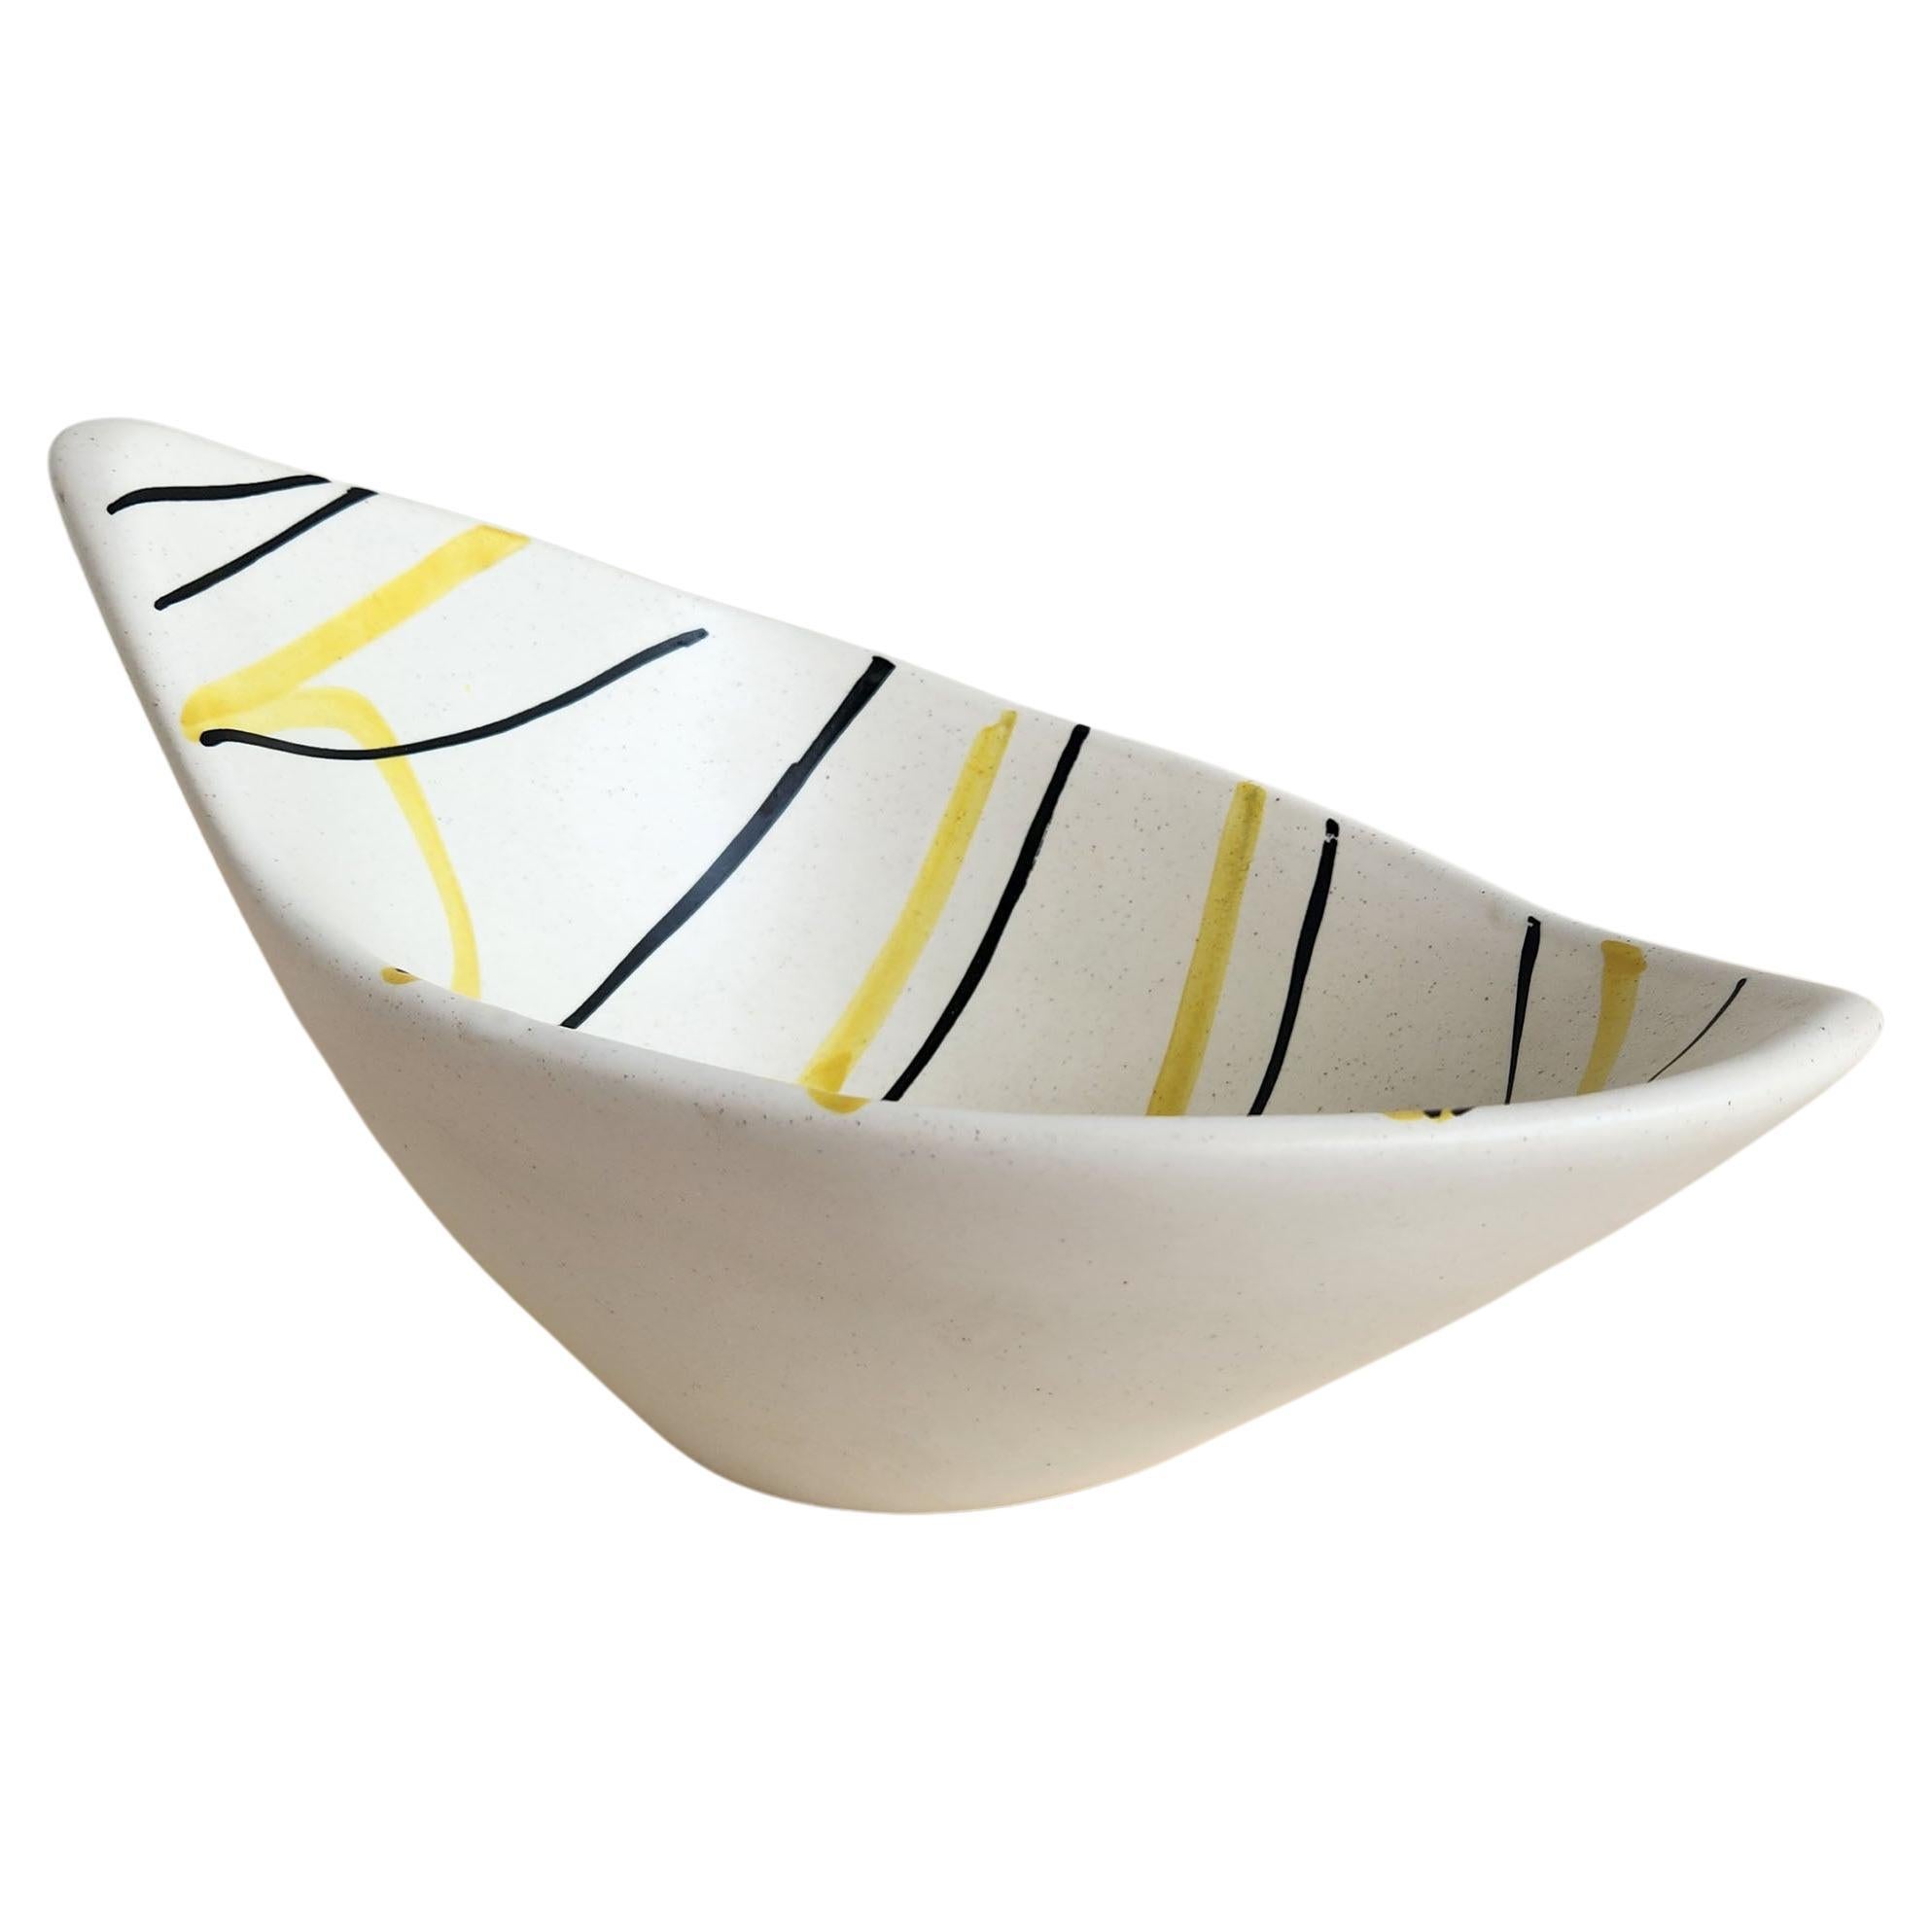 Roger Capron - Slanted Vintage Ceramic Bowl with Yellow and Black Lines